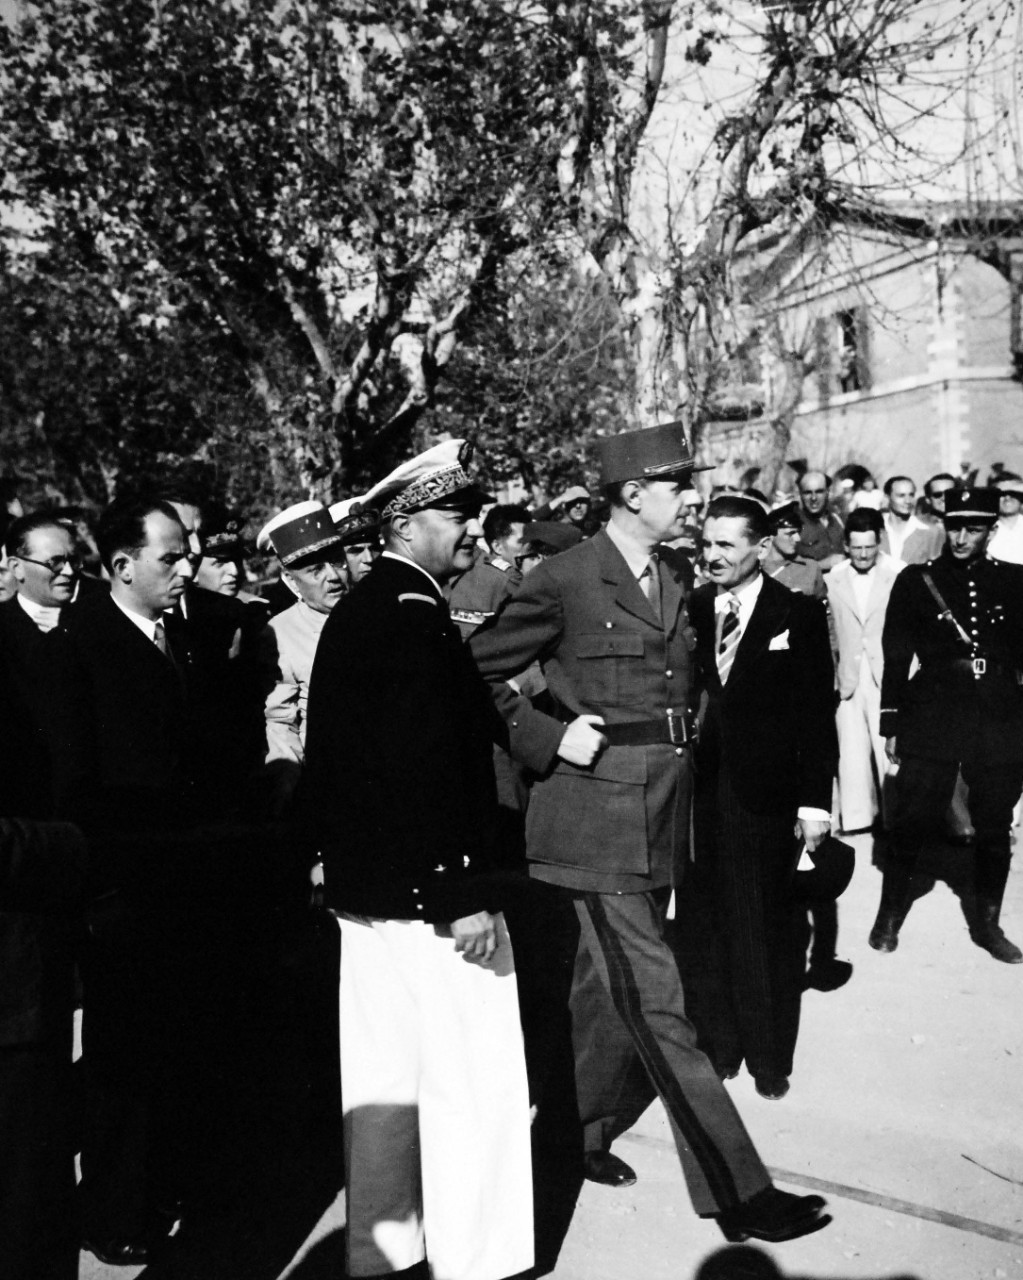 80-G-364097:  Invasion of Southern France, Toulon, August-September 1944.     General Charles de Gaulle at Toulon, France, to inspect the ravaged port areas, 14-15 September 1944.   General de Gaulle returns the salute of French sailors.  Taken by crew of USS Catoctin  (AGC 5).   Official U.S. Navy Photograph, now in the collections of the National Arcchives.    (2014/7/10).